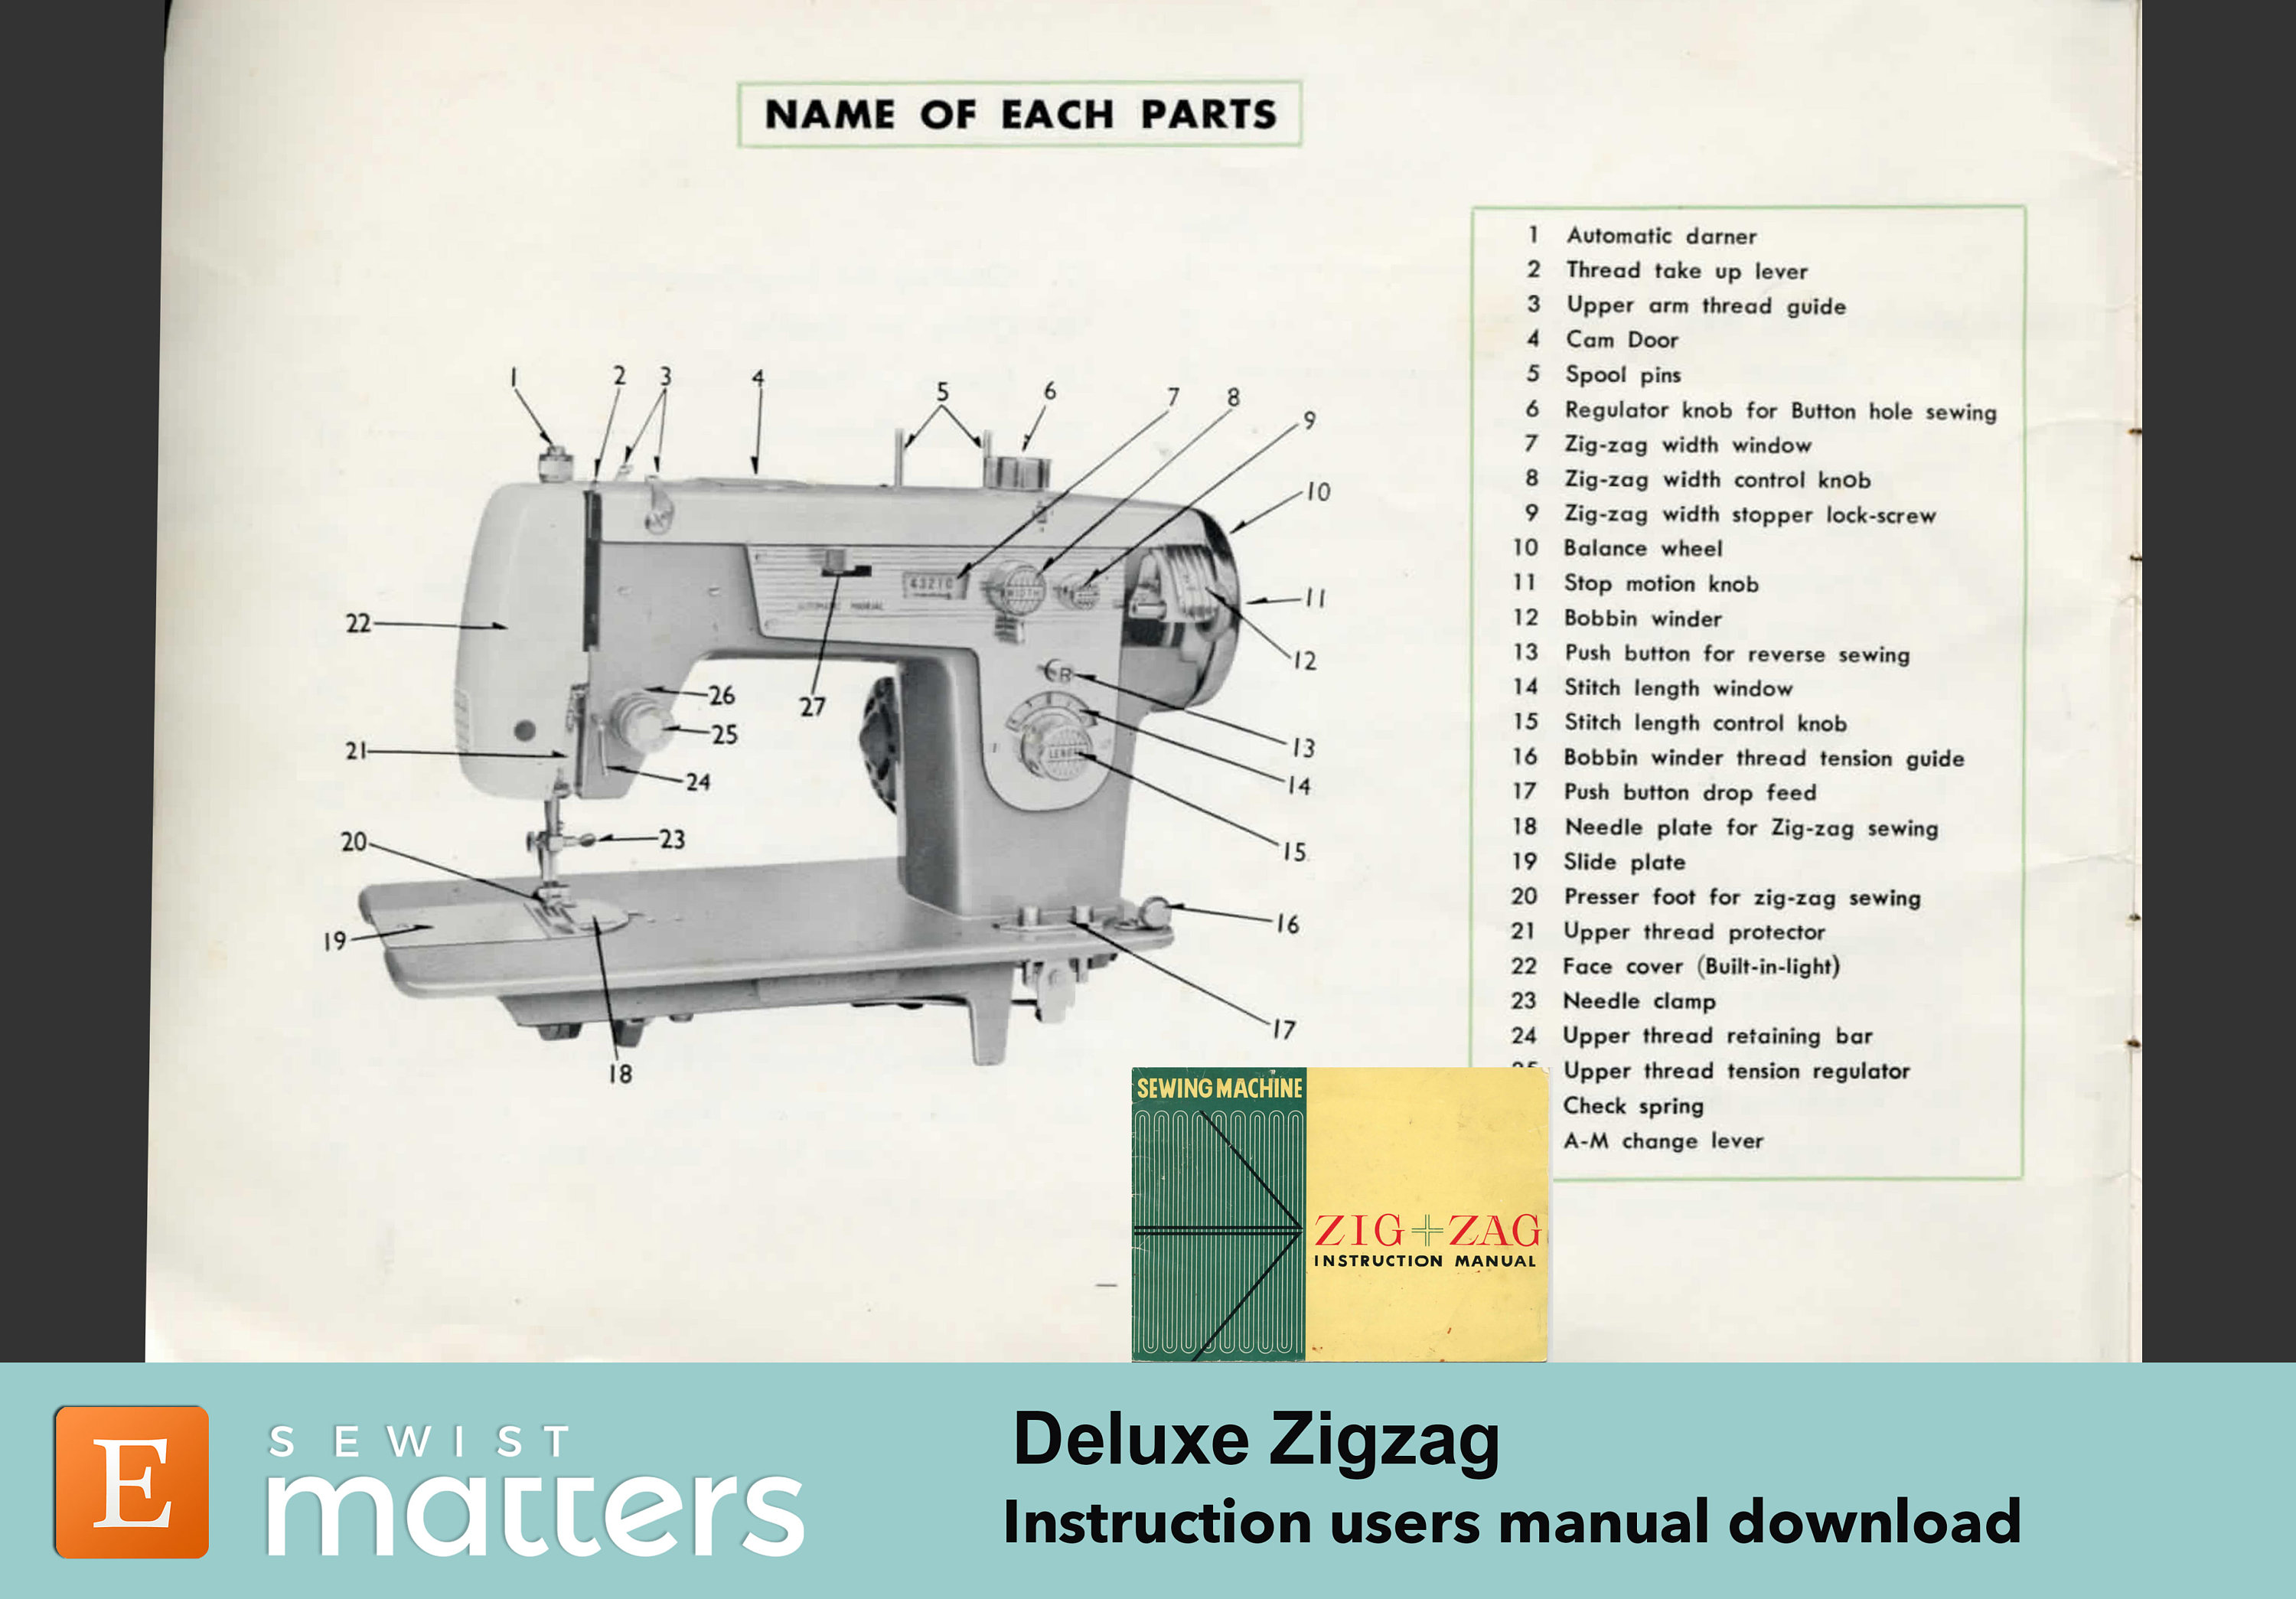 Deluxe Zigzag Sewing Machine Instruction Manual PDF Download